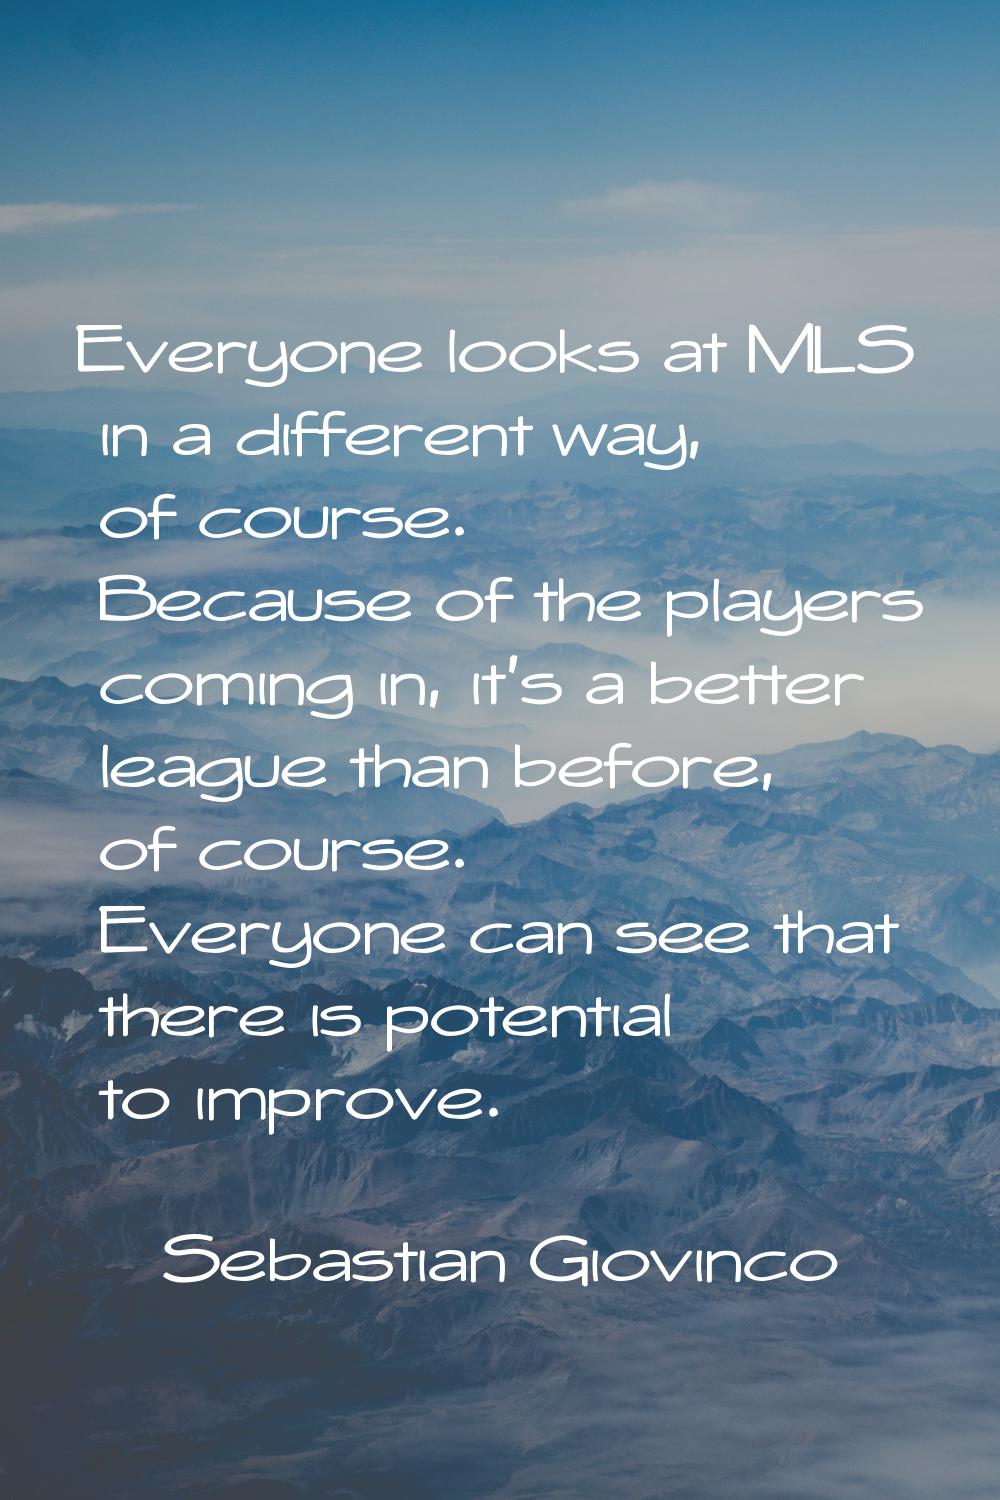 Everyone looks at MLS in a different way, of course. Because of the players coming in, it's a bette